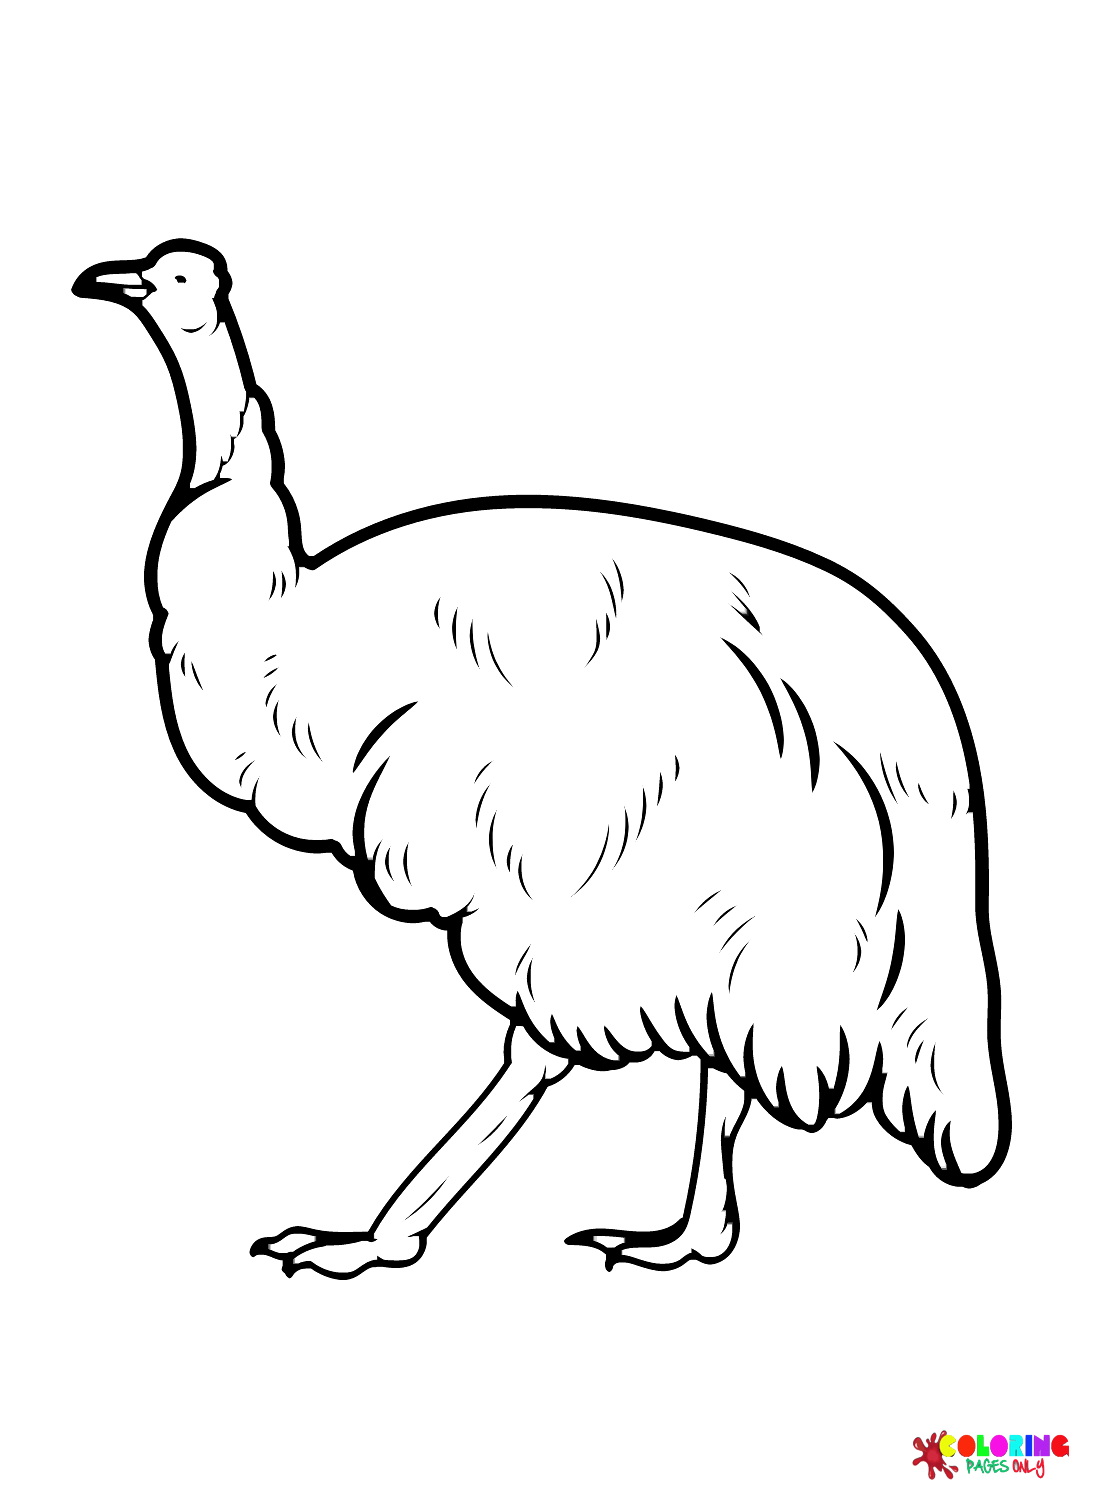 11+ Emu Coloring Page